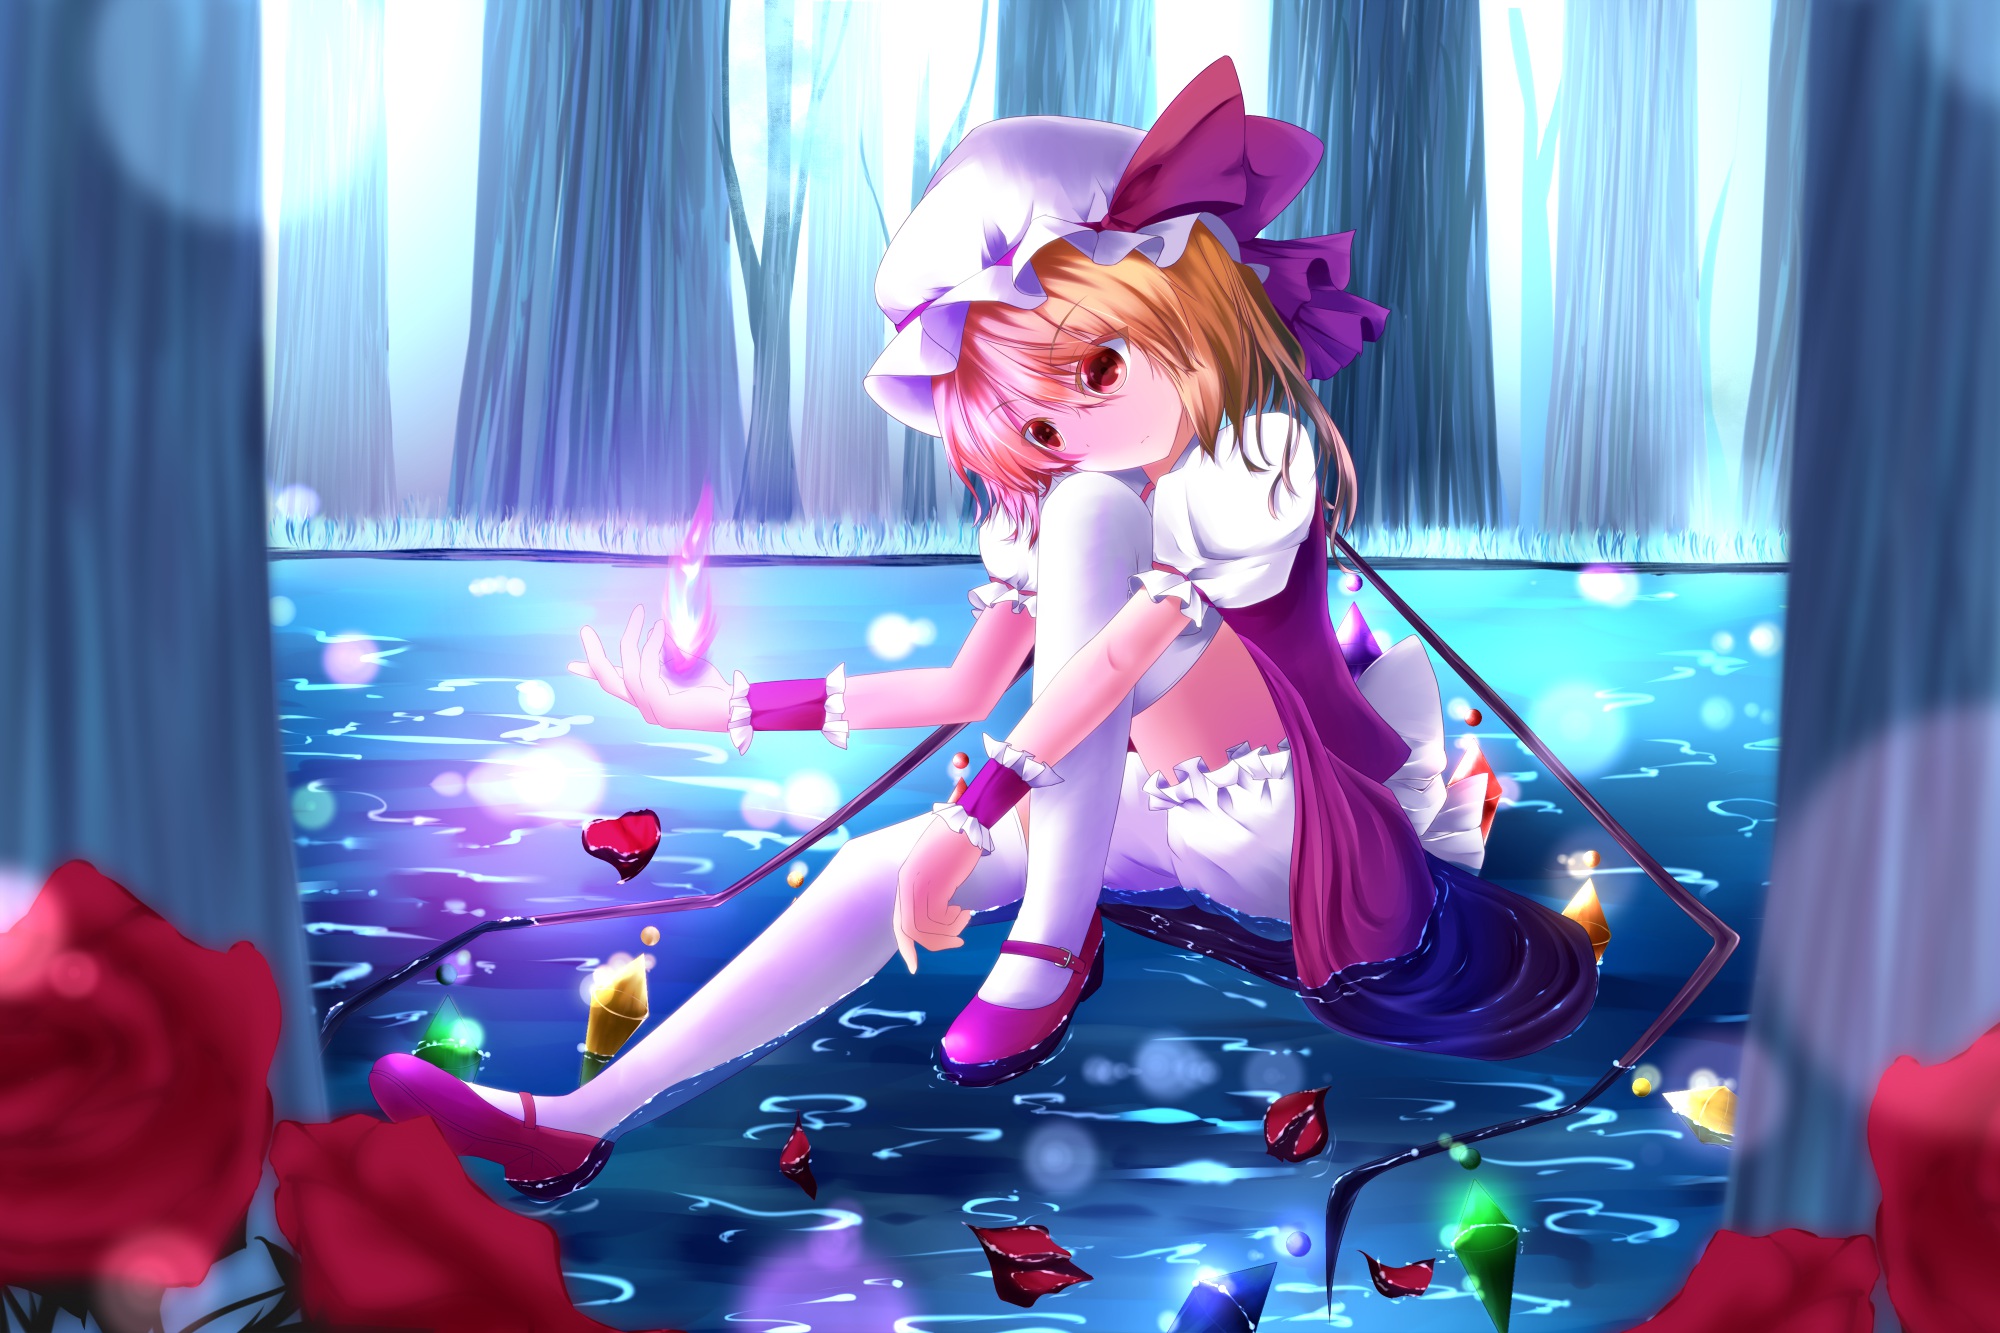 aru,  tohomoyashi , Blonde, Hair, Bow, Fire, Flandre, Scarlet, Flowers, Forest, Grass, Hat, Petals, Rose, Short, Hair, Tagme, Thighhighs, Touhou, Tree, Water, Wings Wallpaper